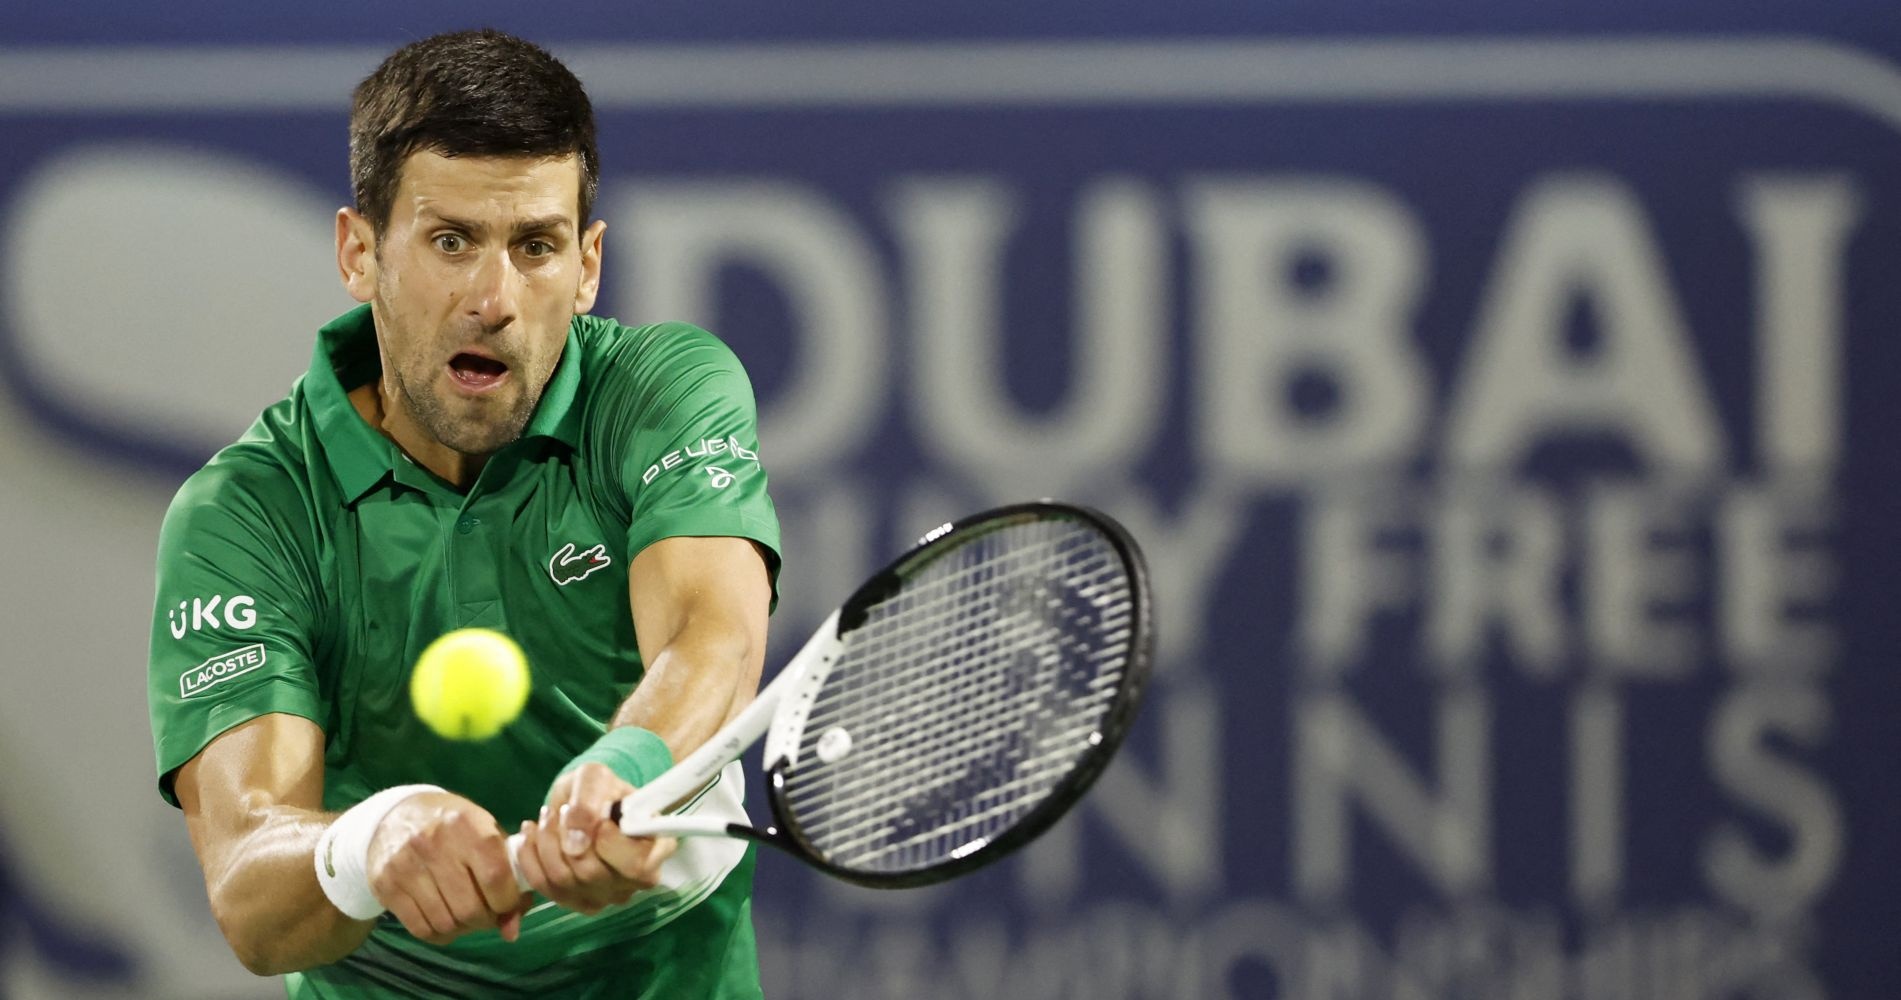 Serbia's Novak Djokovic in action during his first round match against Italy's Lorenzo Musetti at the Dubai Tennis Championships